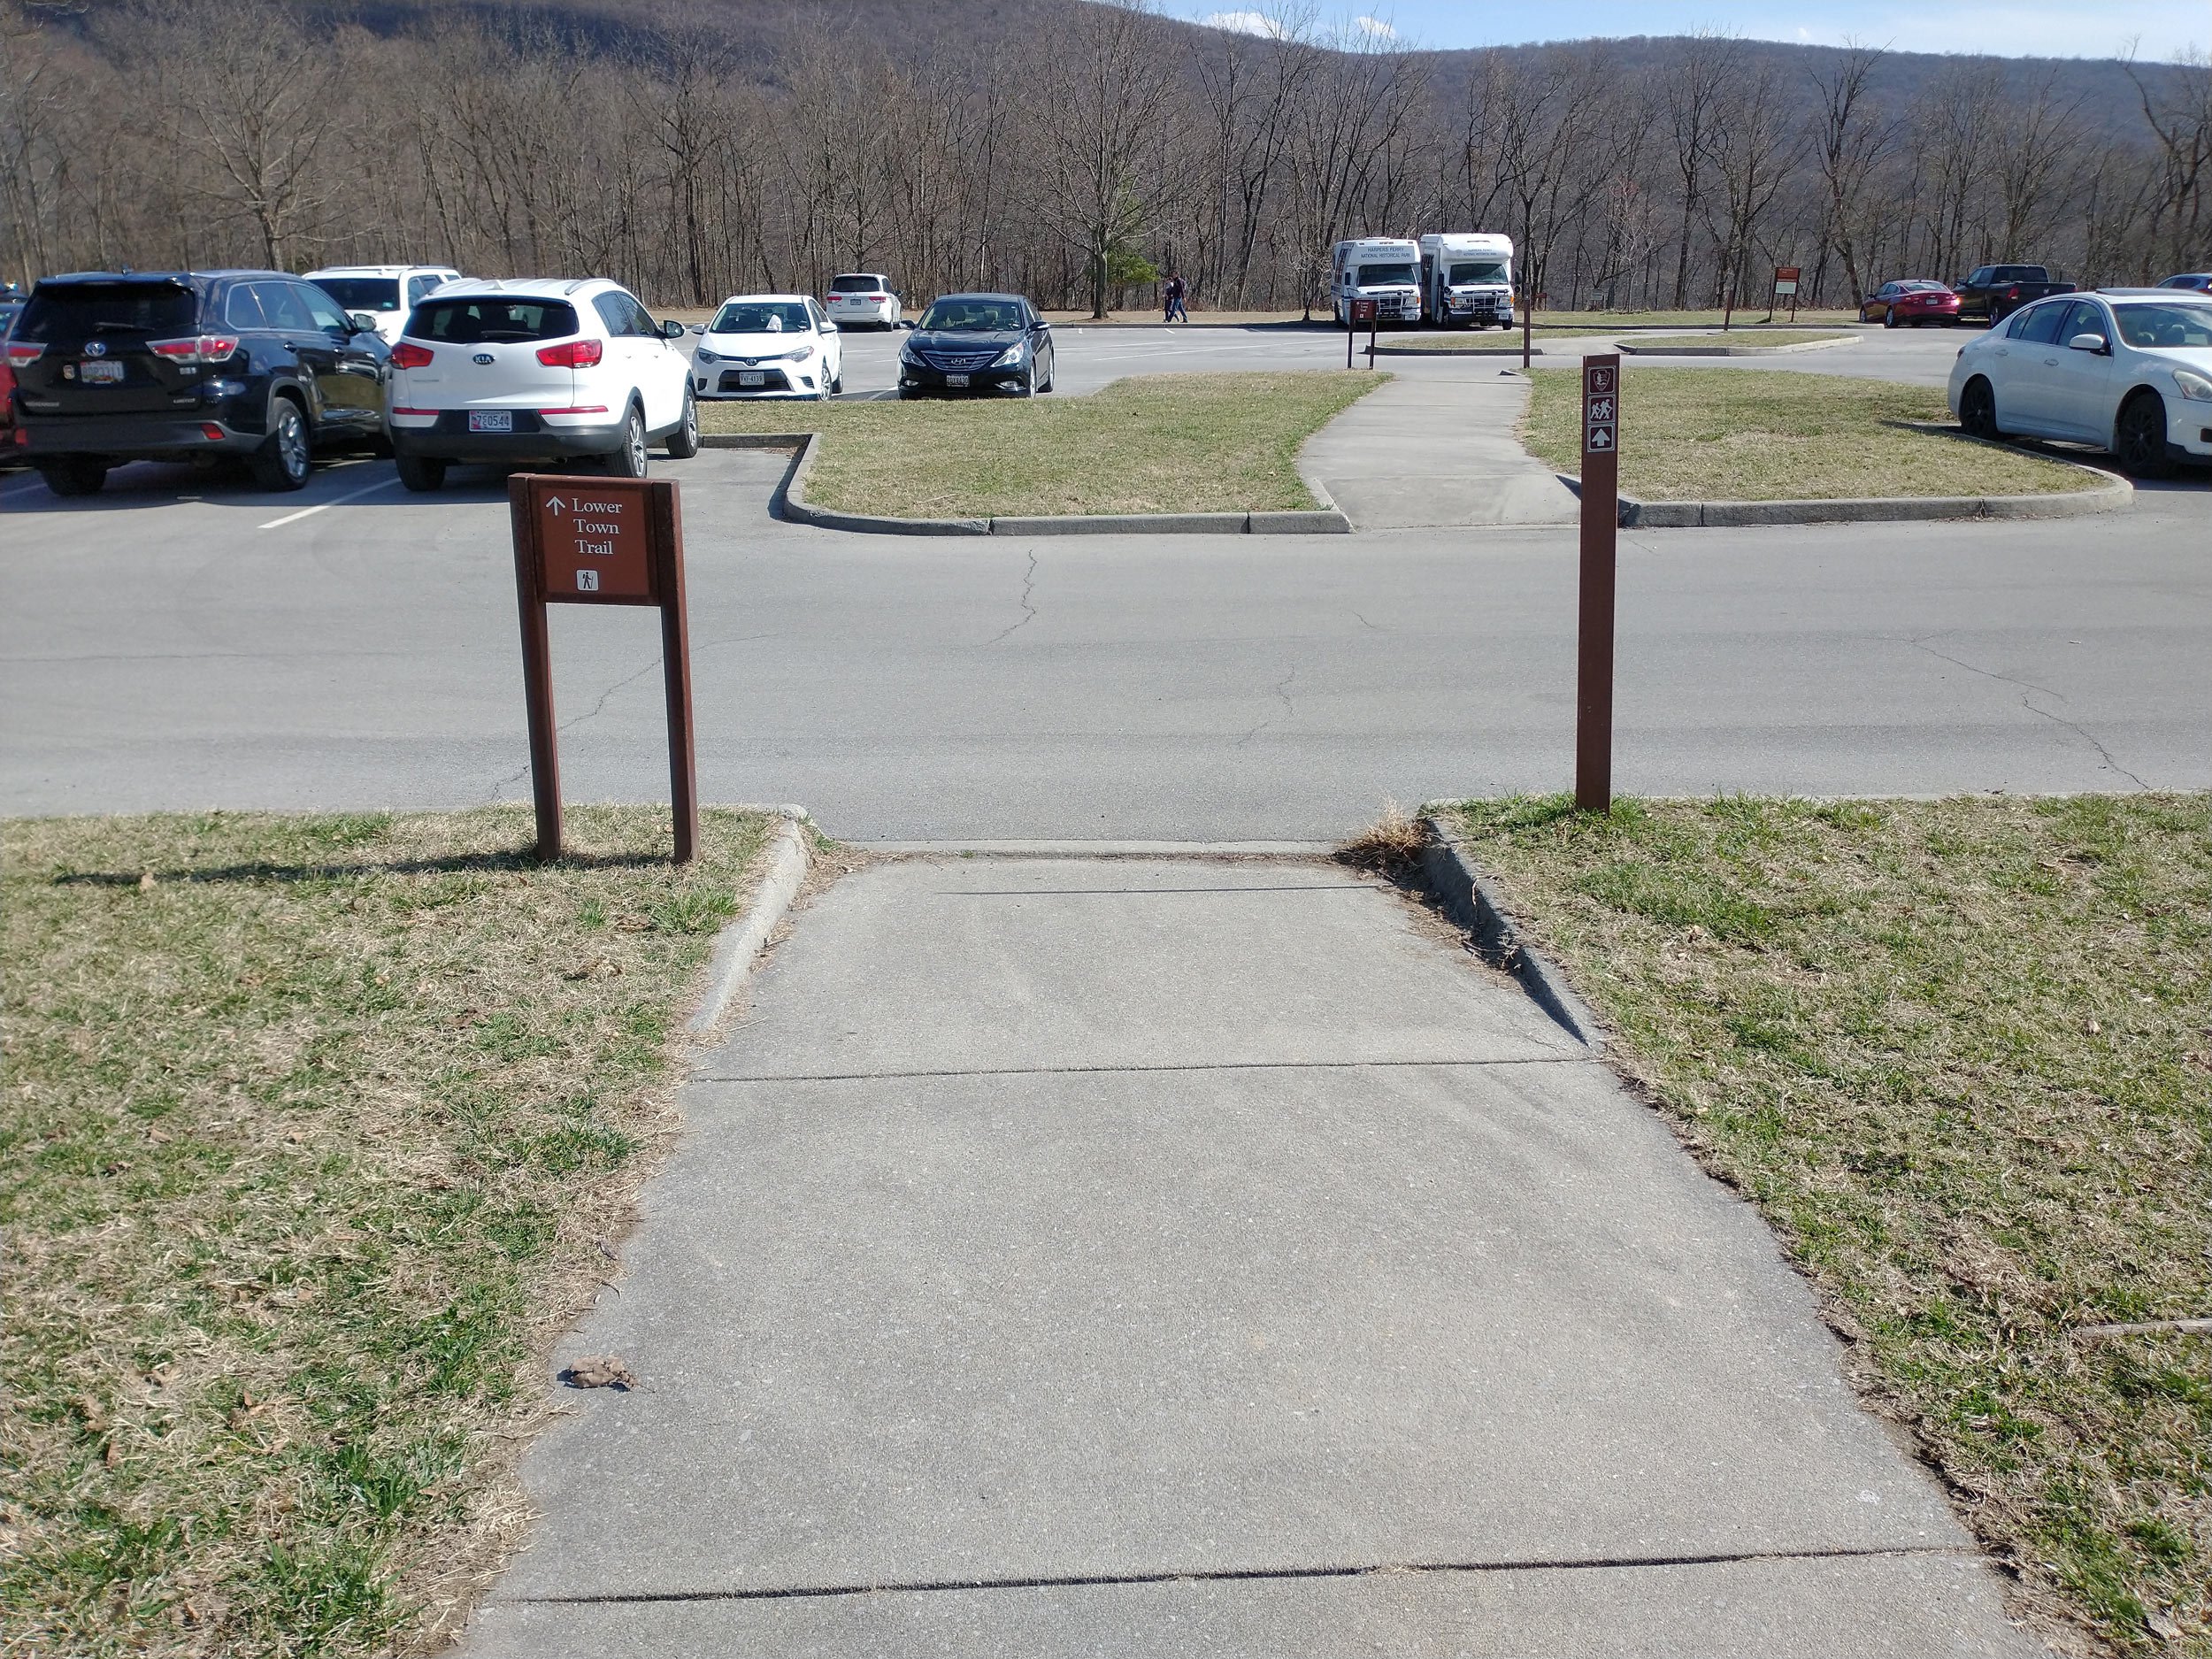 parking-lot-for-harpers-ferry-visitors-center